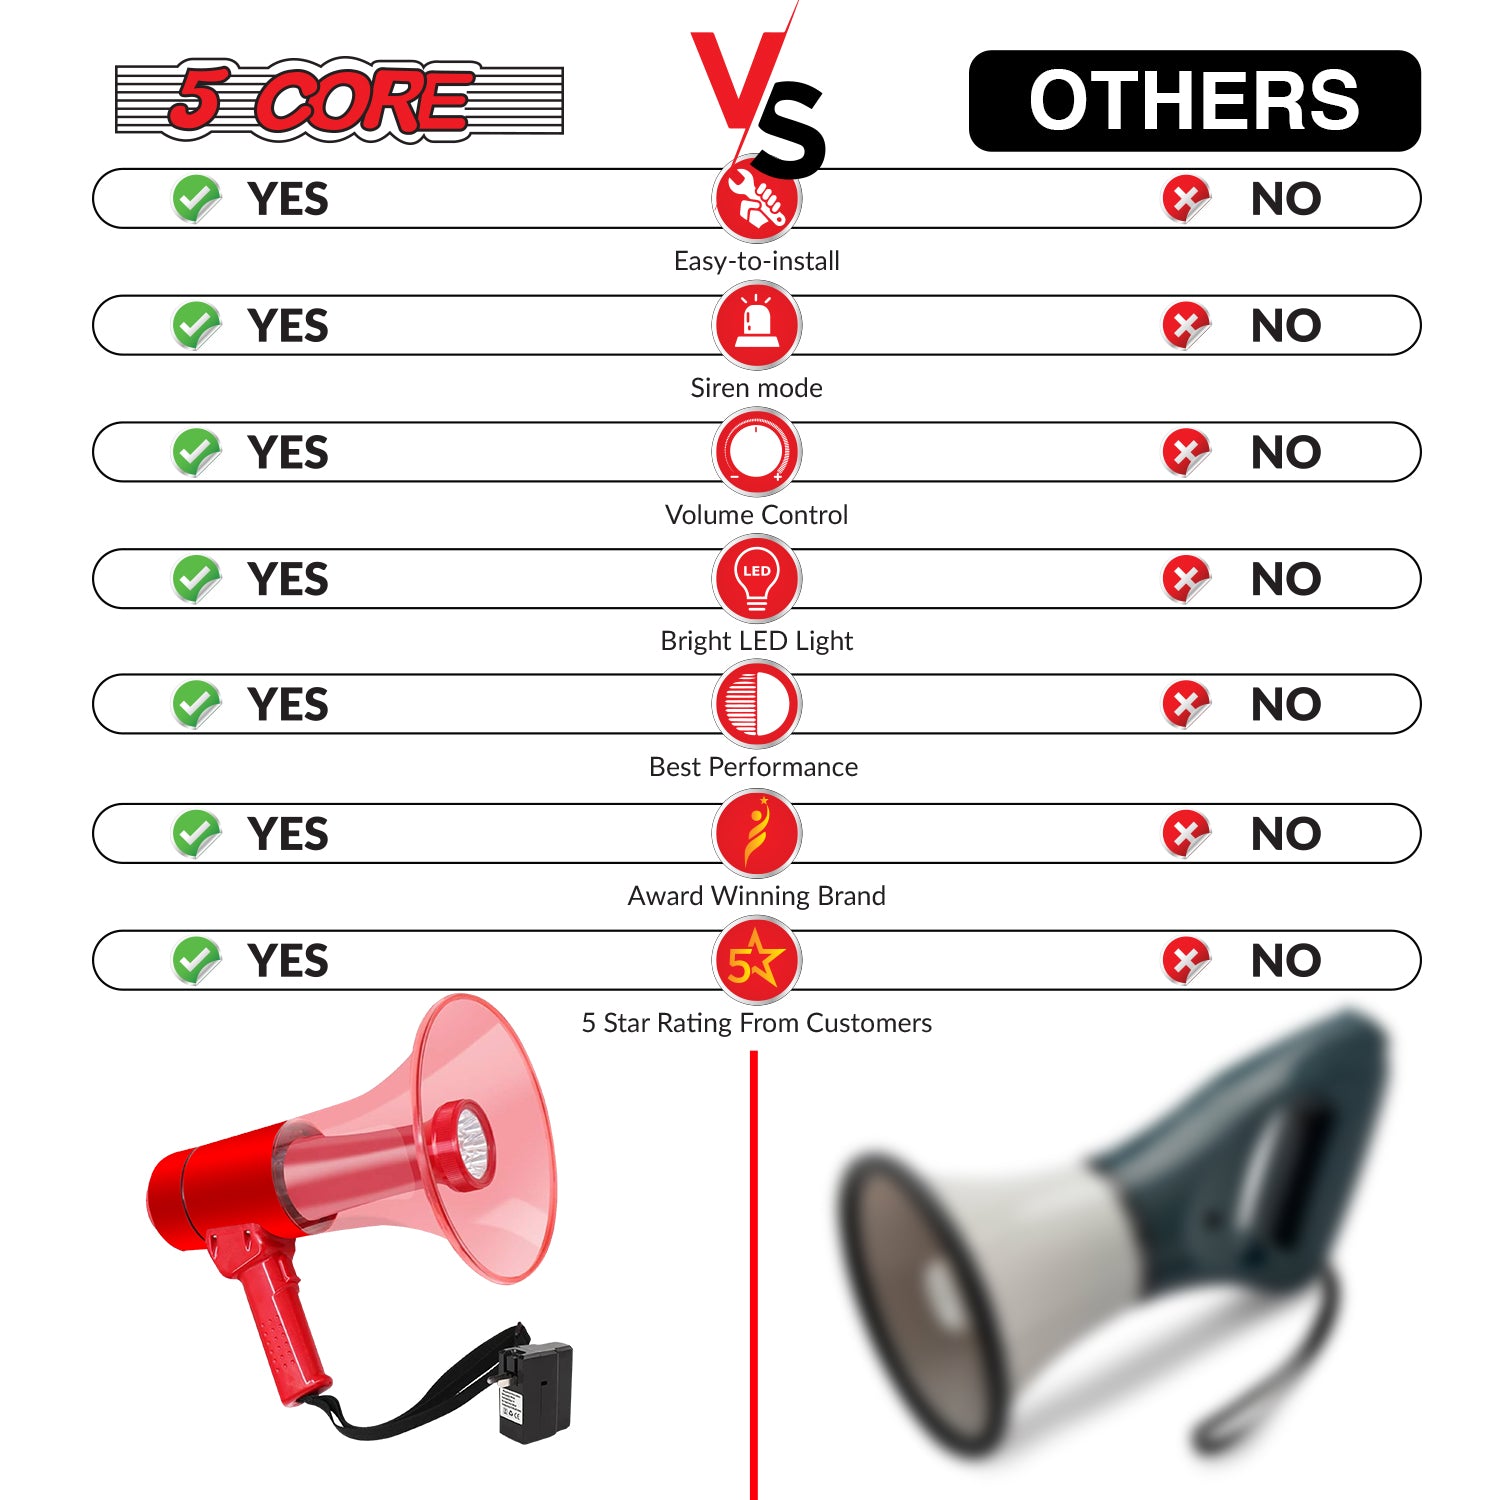 Compact and durable red 5 Core megaphone, suitable for various applications and environments.